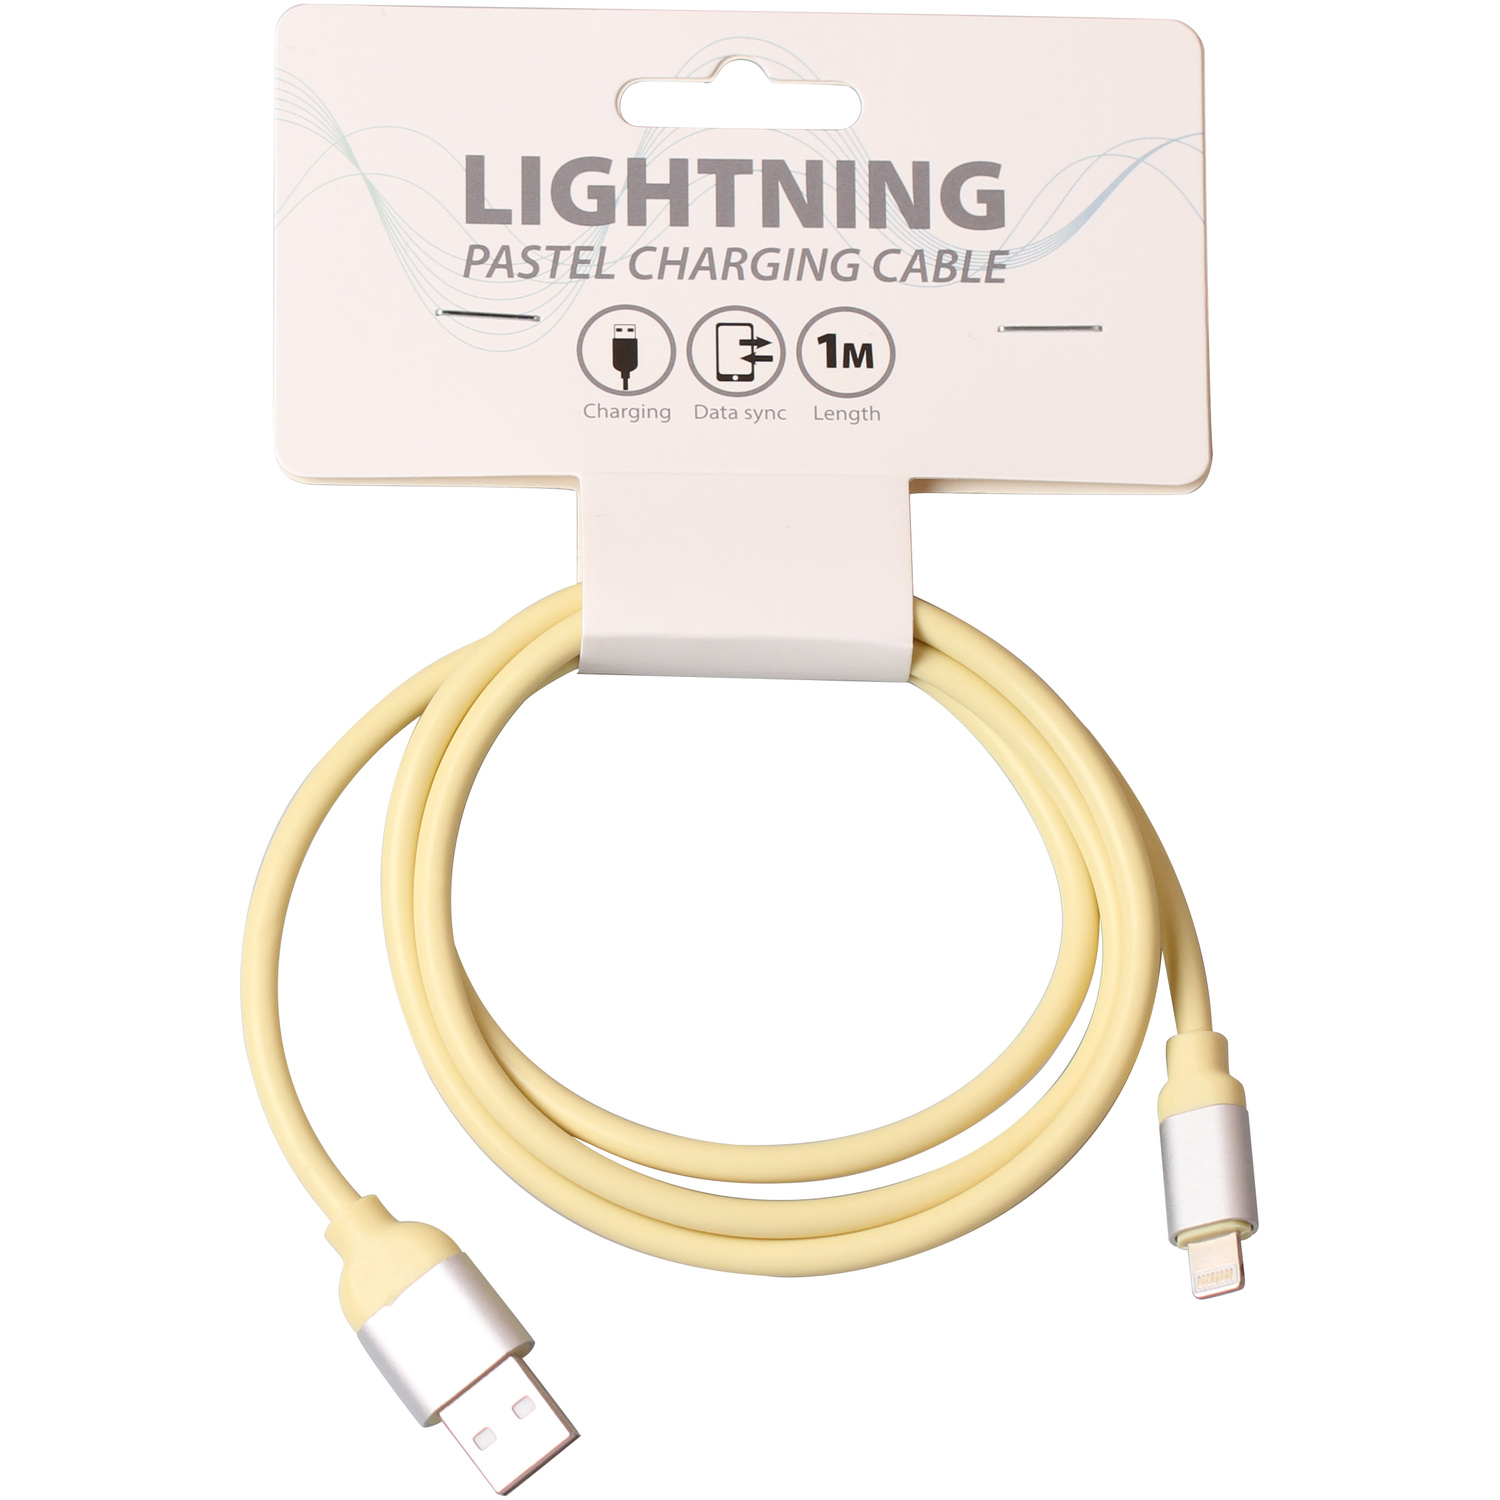 Lightning Pastel Charging Cable Image 4